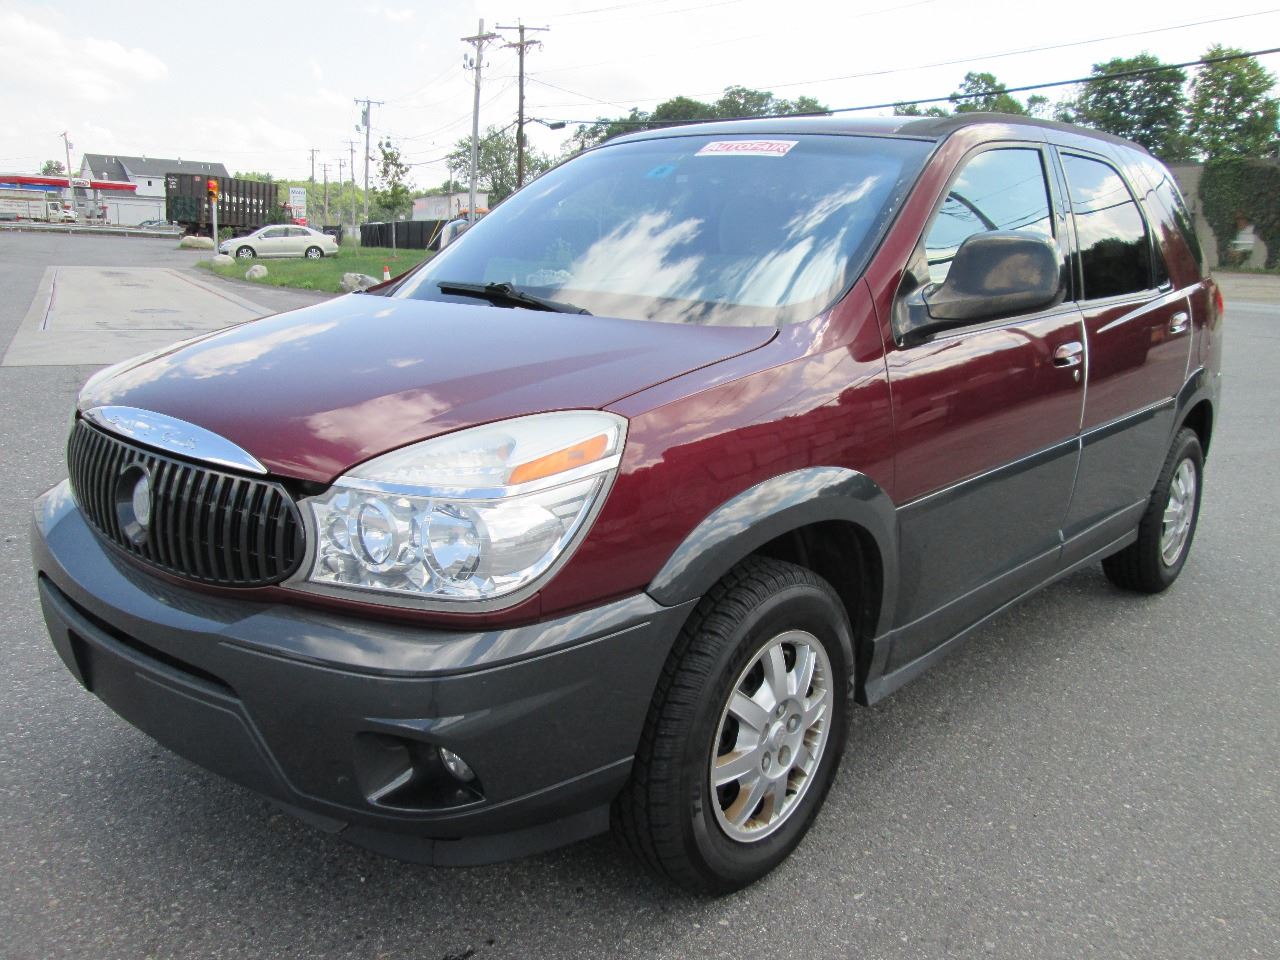 2004 Buick Rendezvous for sale at Kostyas Auto Sales Inc in Swansea MA